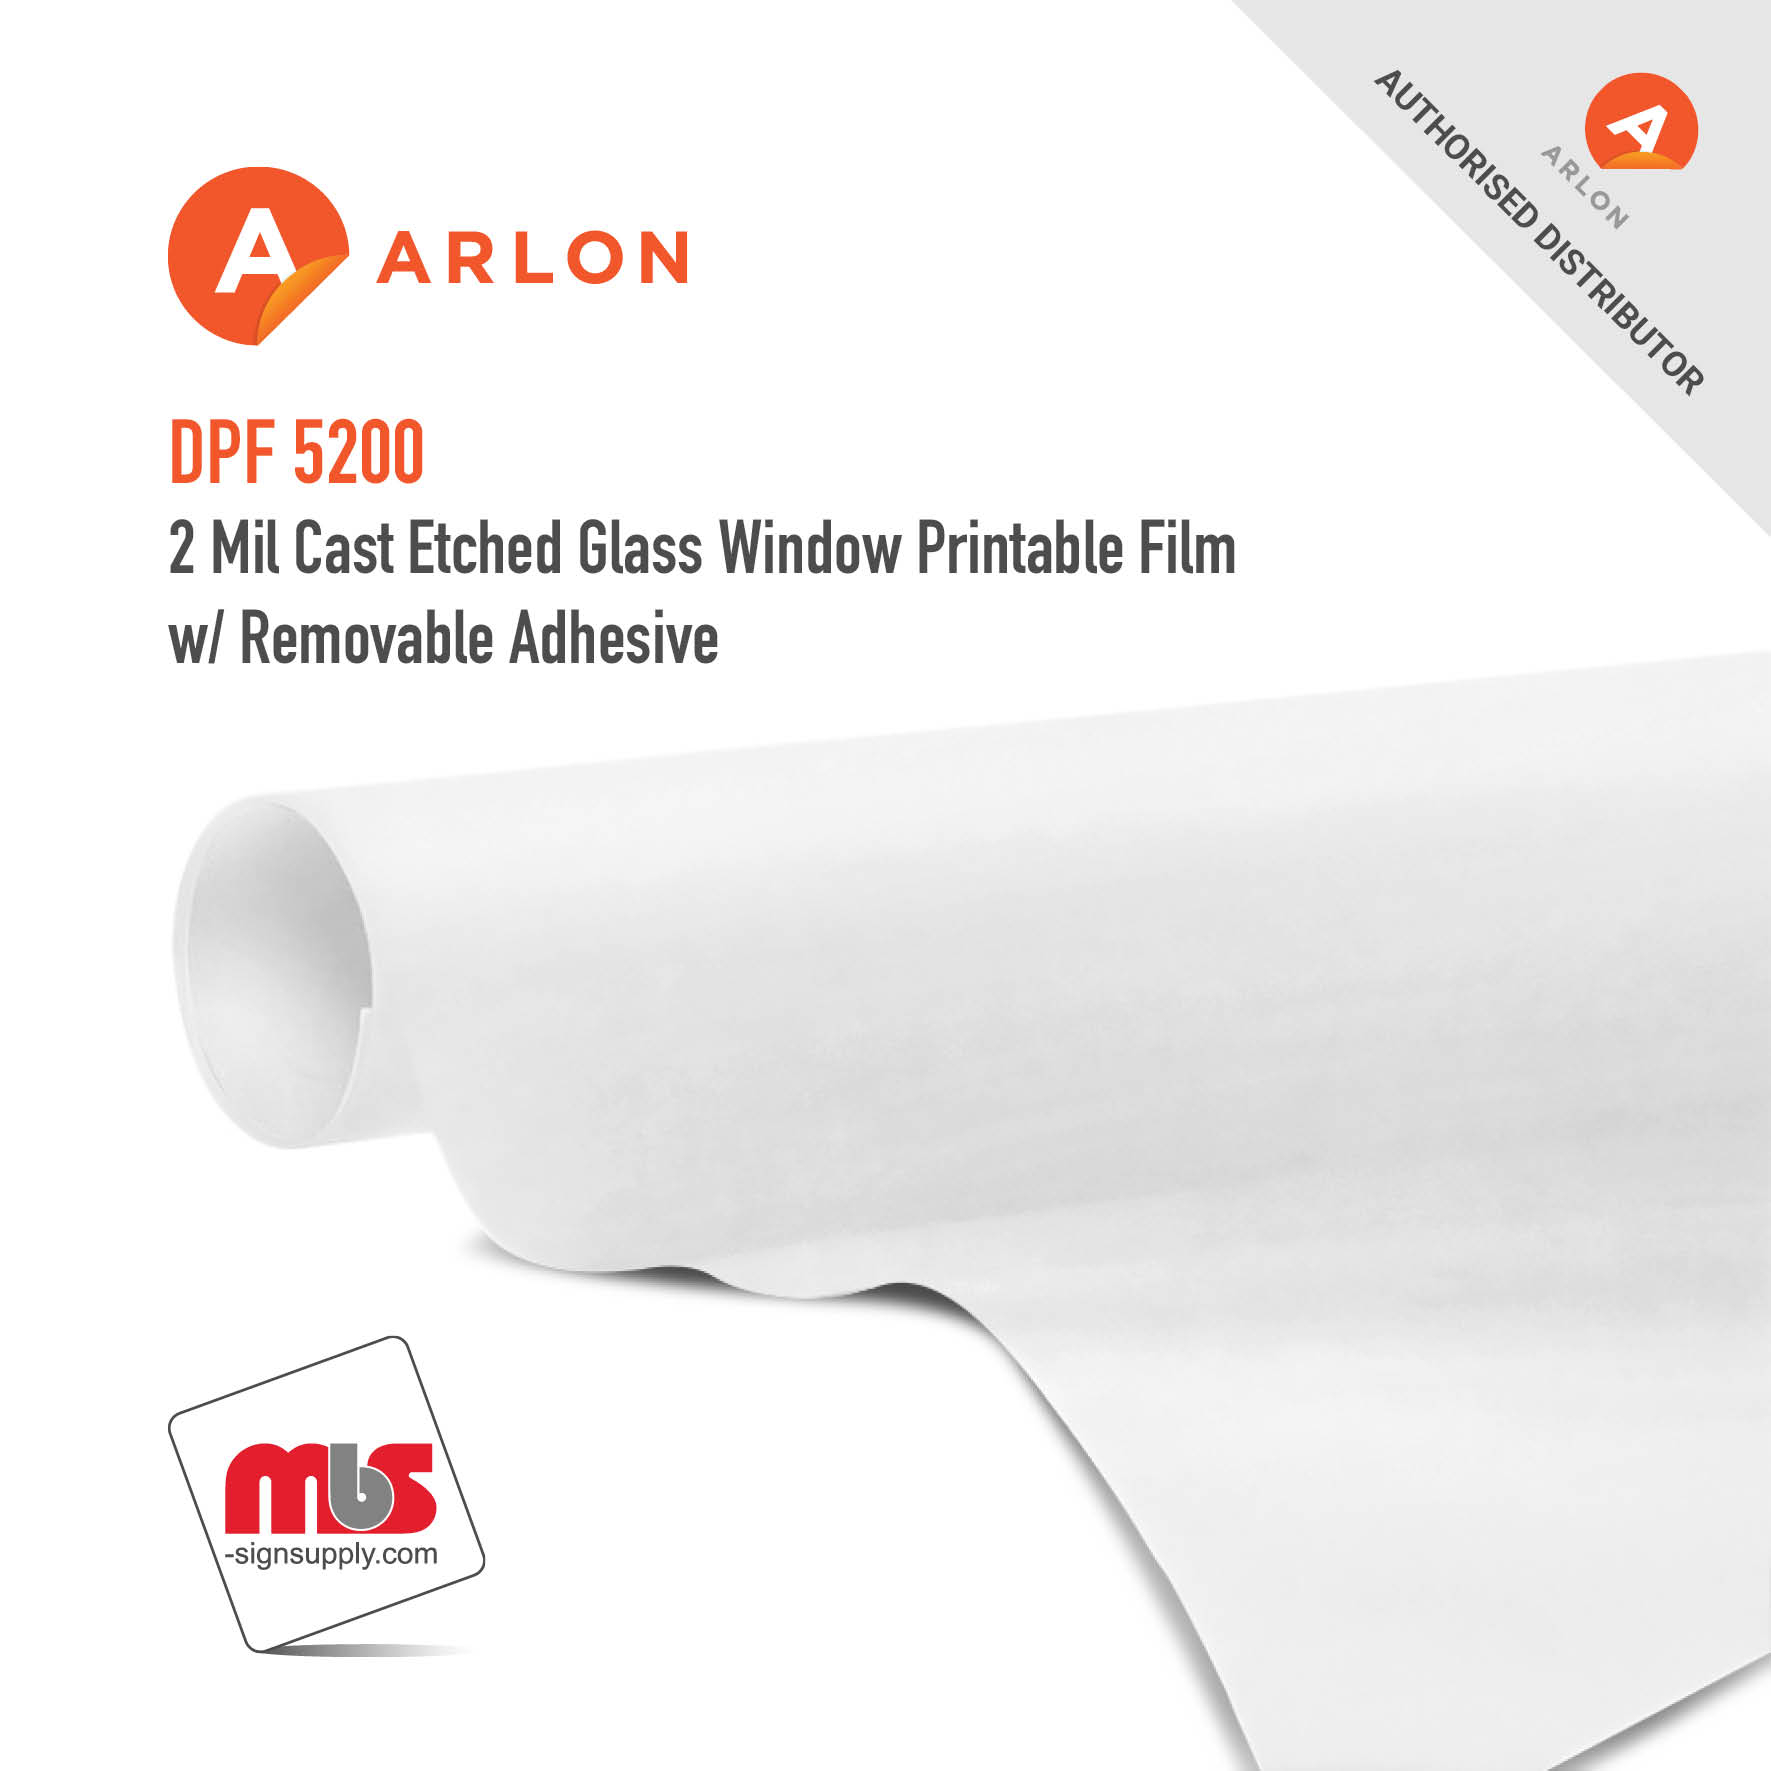 24'' x 50 Yard Roll - Arlon DPF 5200 2 Mil Cast Silver Etched Glass Window Printable Film w/ Removable Adhesive